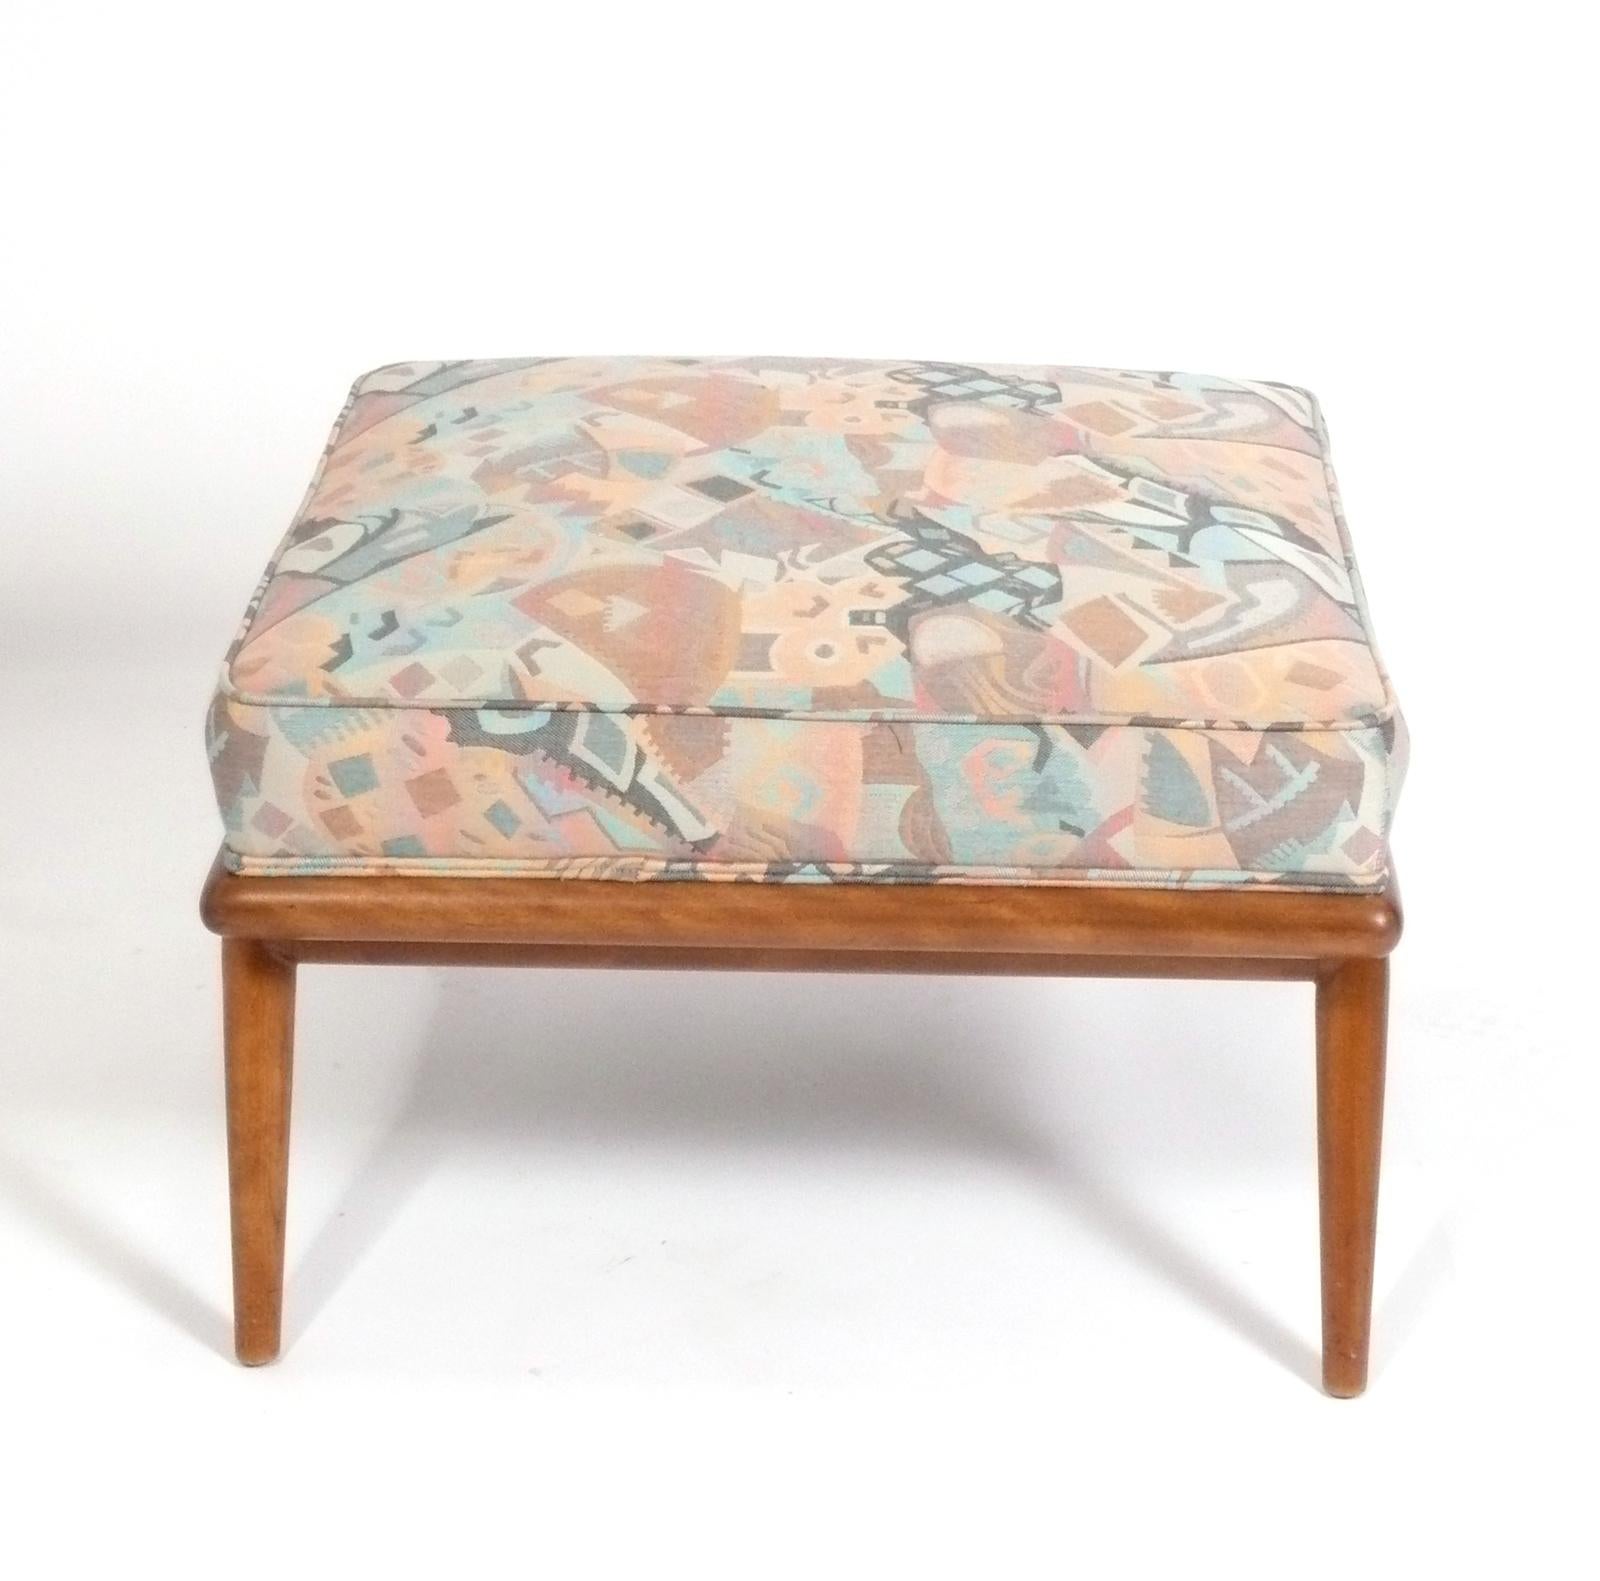 Elegant splayed leg stool or ottoman, designed by T.H. Robsjohn Gibbings for Widdicomb, American, circa 1950s. This stool is currently being reupholstered and can be completed in your fabric. Simply send us 2 yards of your fabric after purchase.